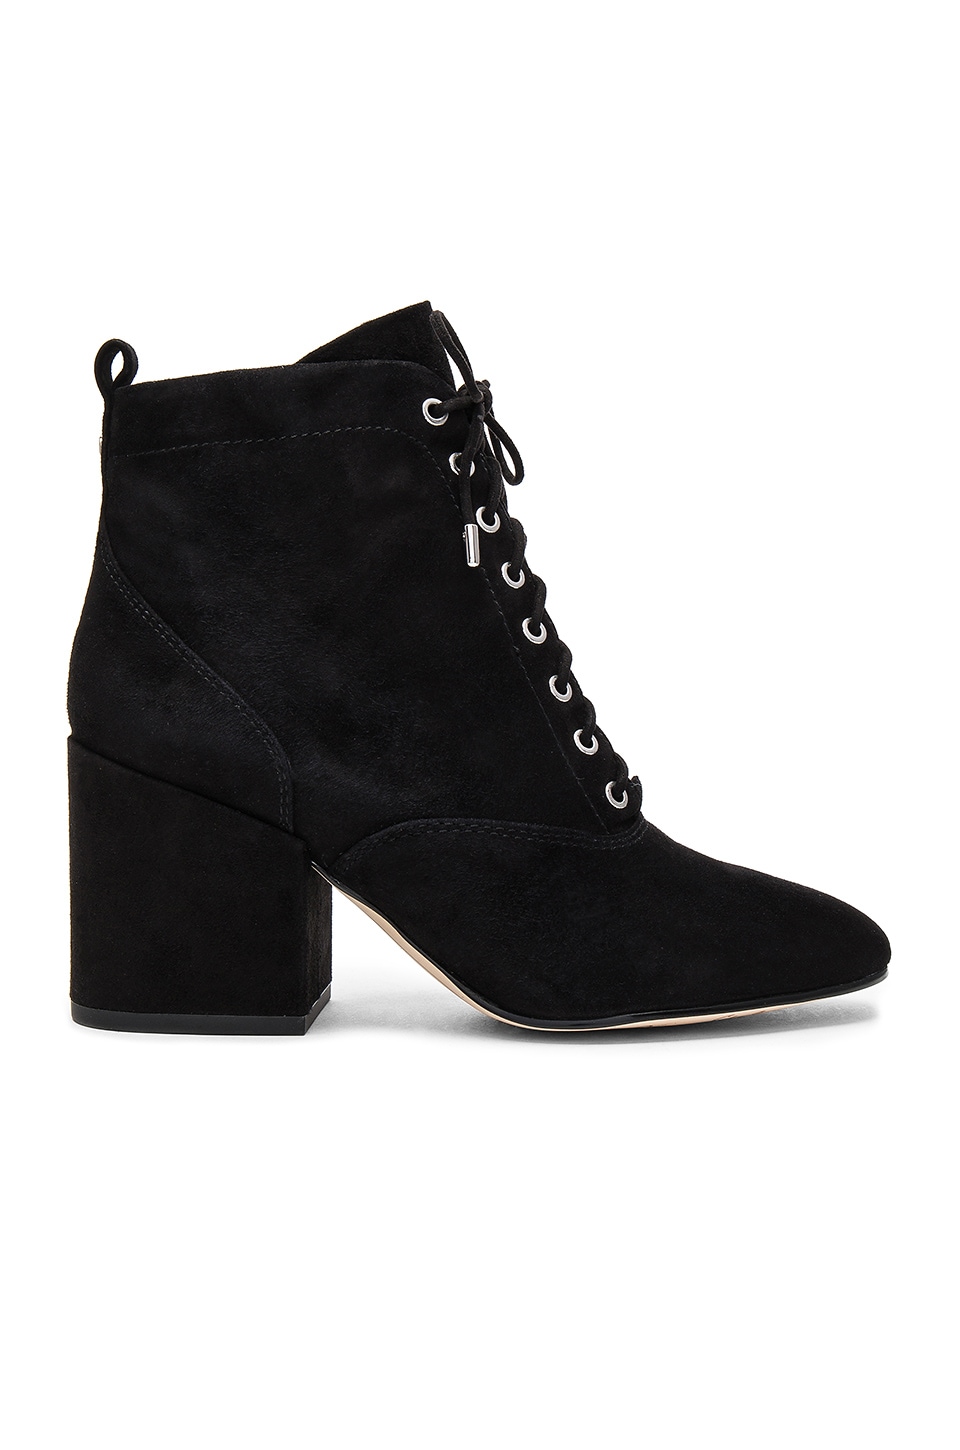 SAM EDELMAN Tate Lace Up Booties